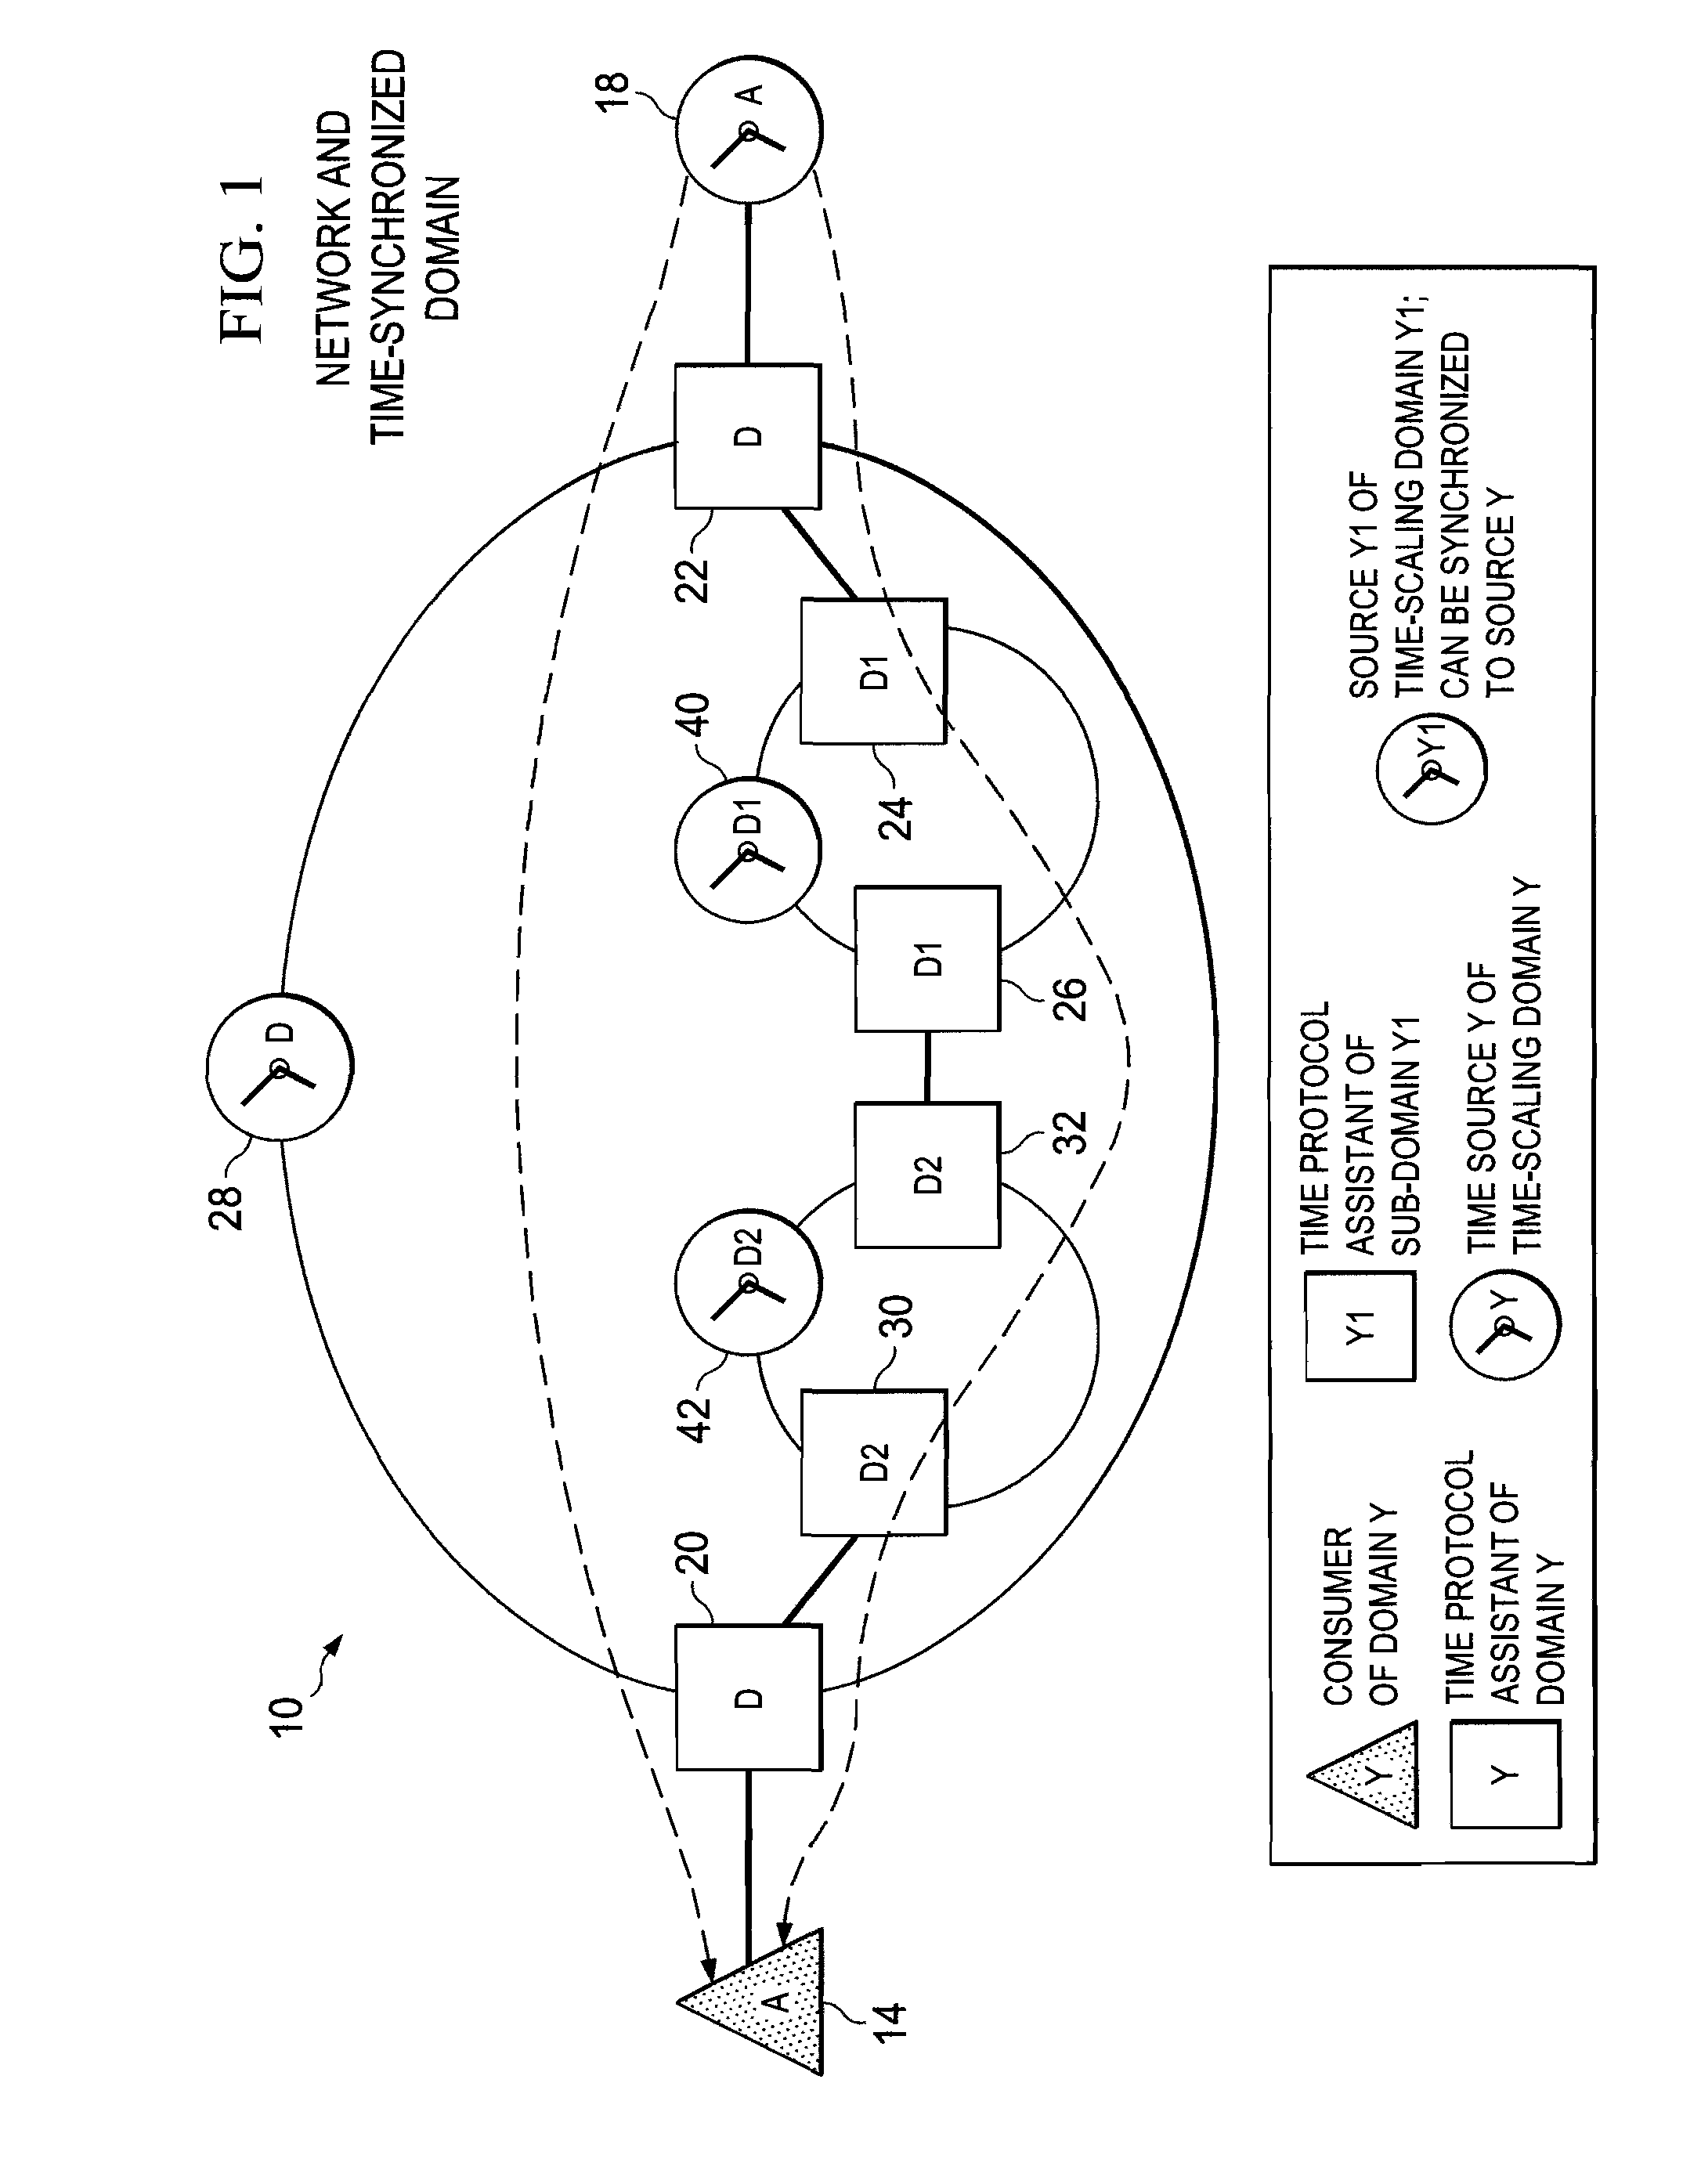 System and method for providing quality inter-domain network time transport